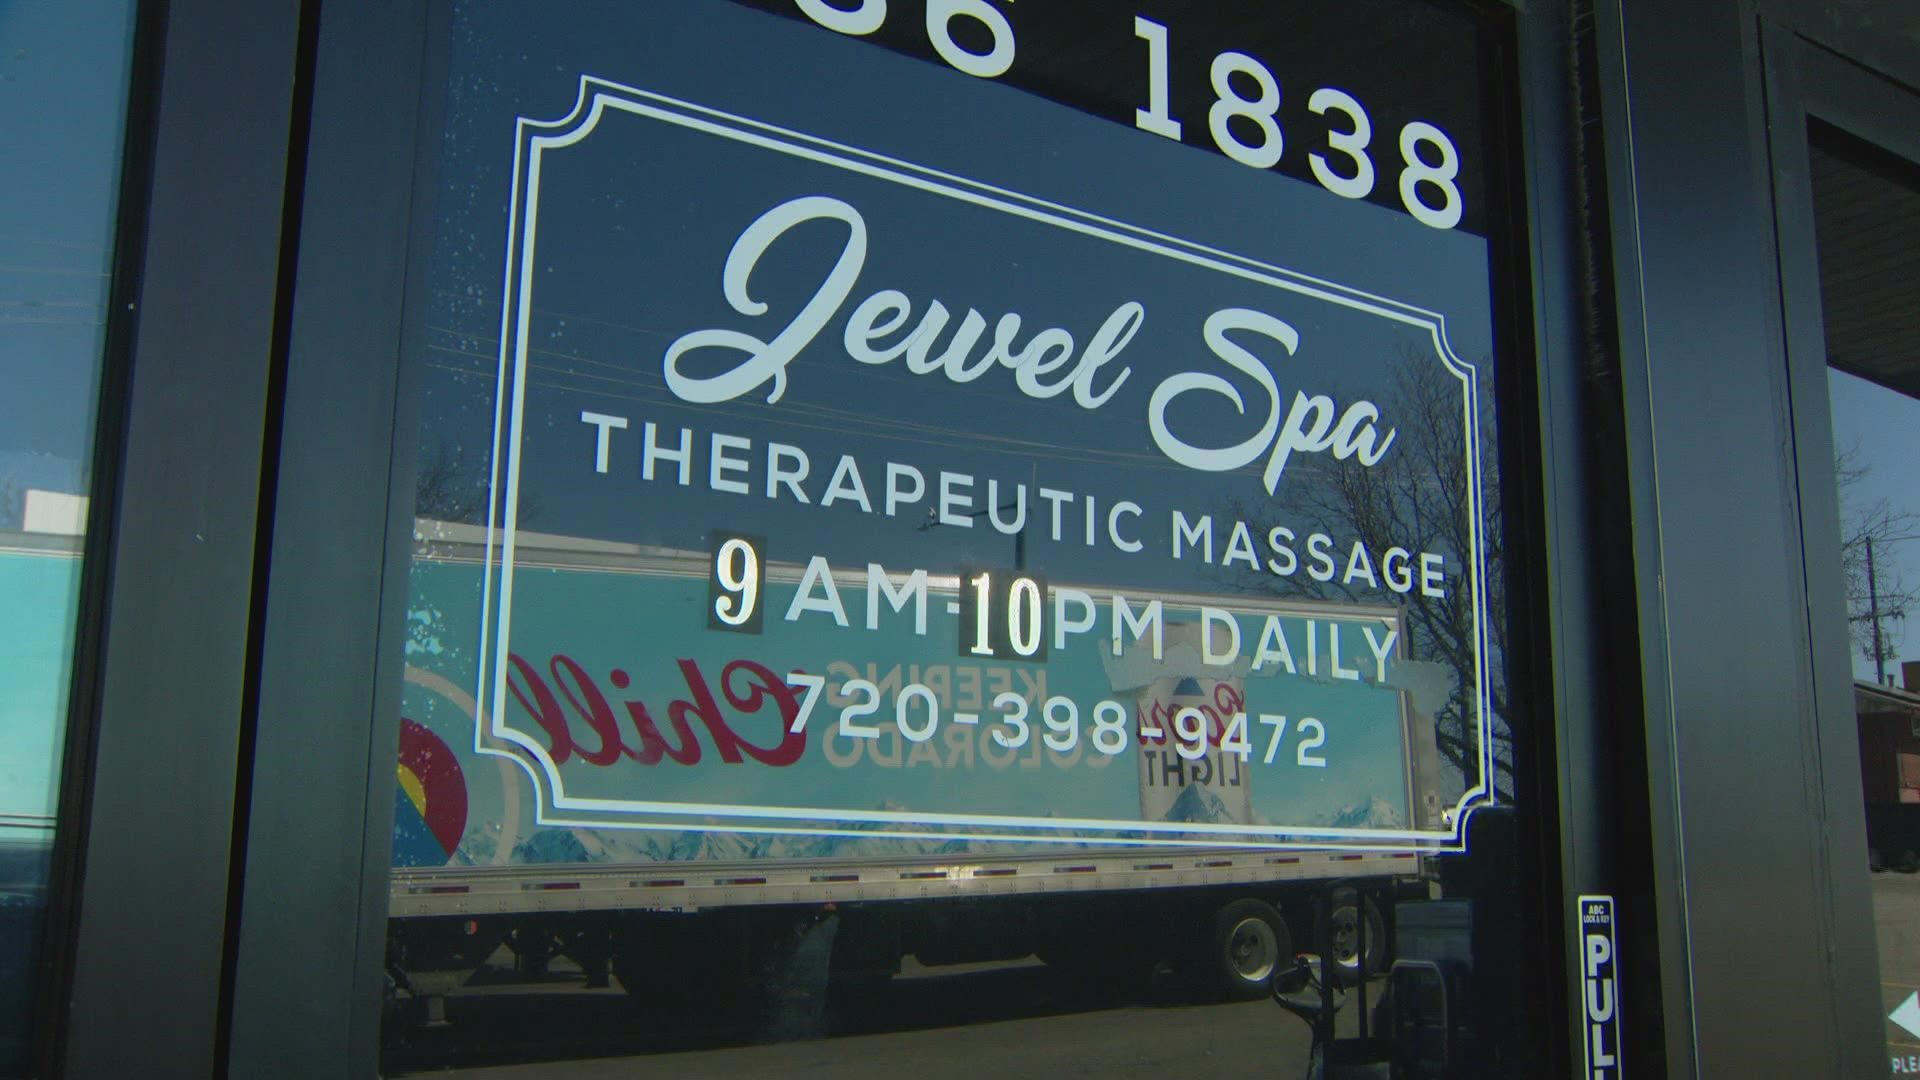 After a male customer was propositioned for sexual services at a massage parlor, an investigation is now underway on local spas.